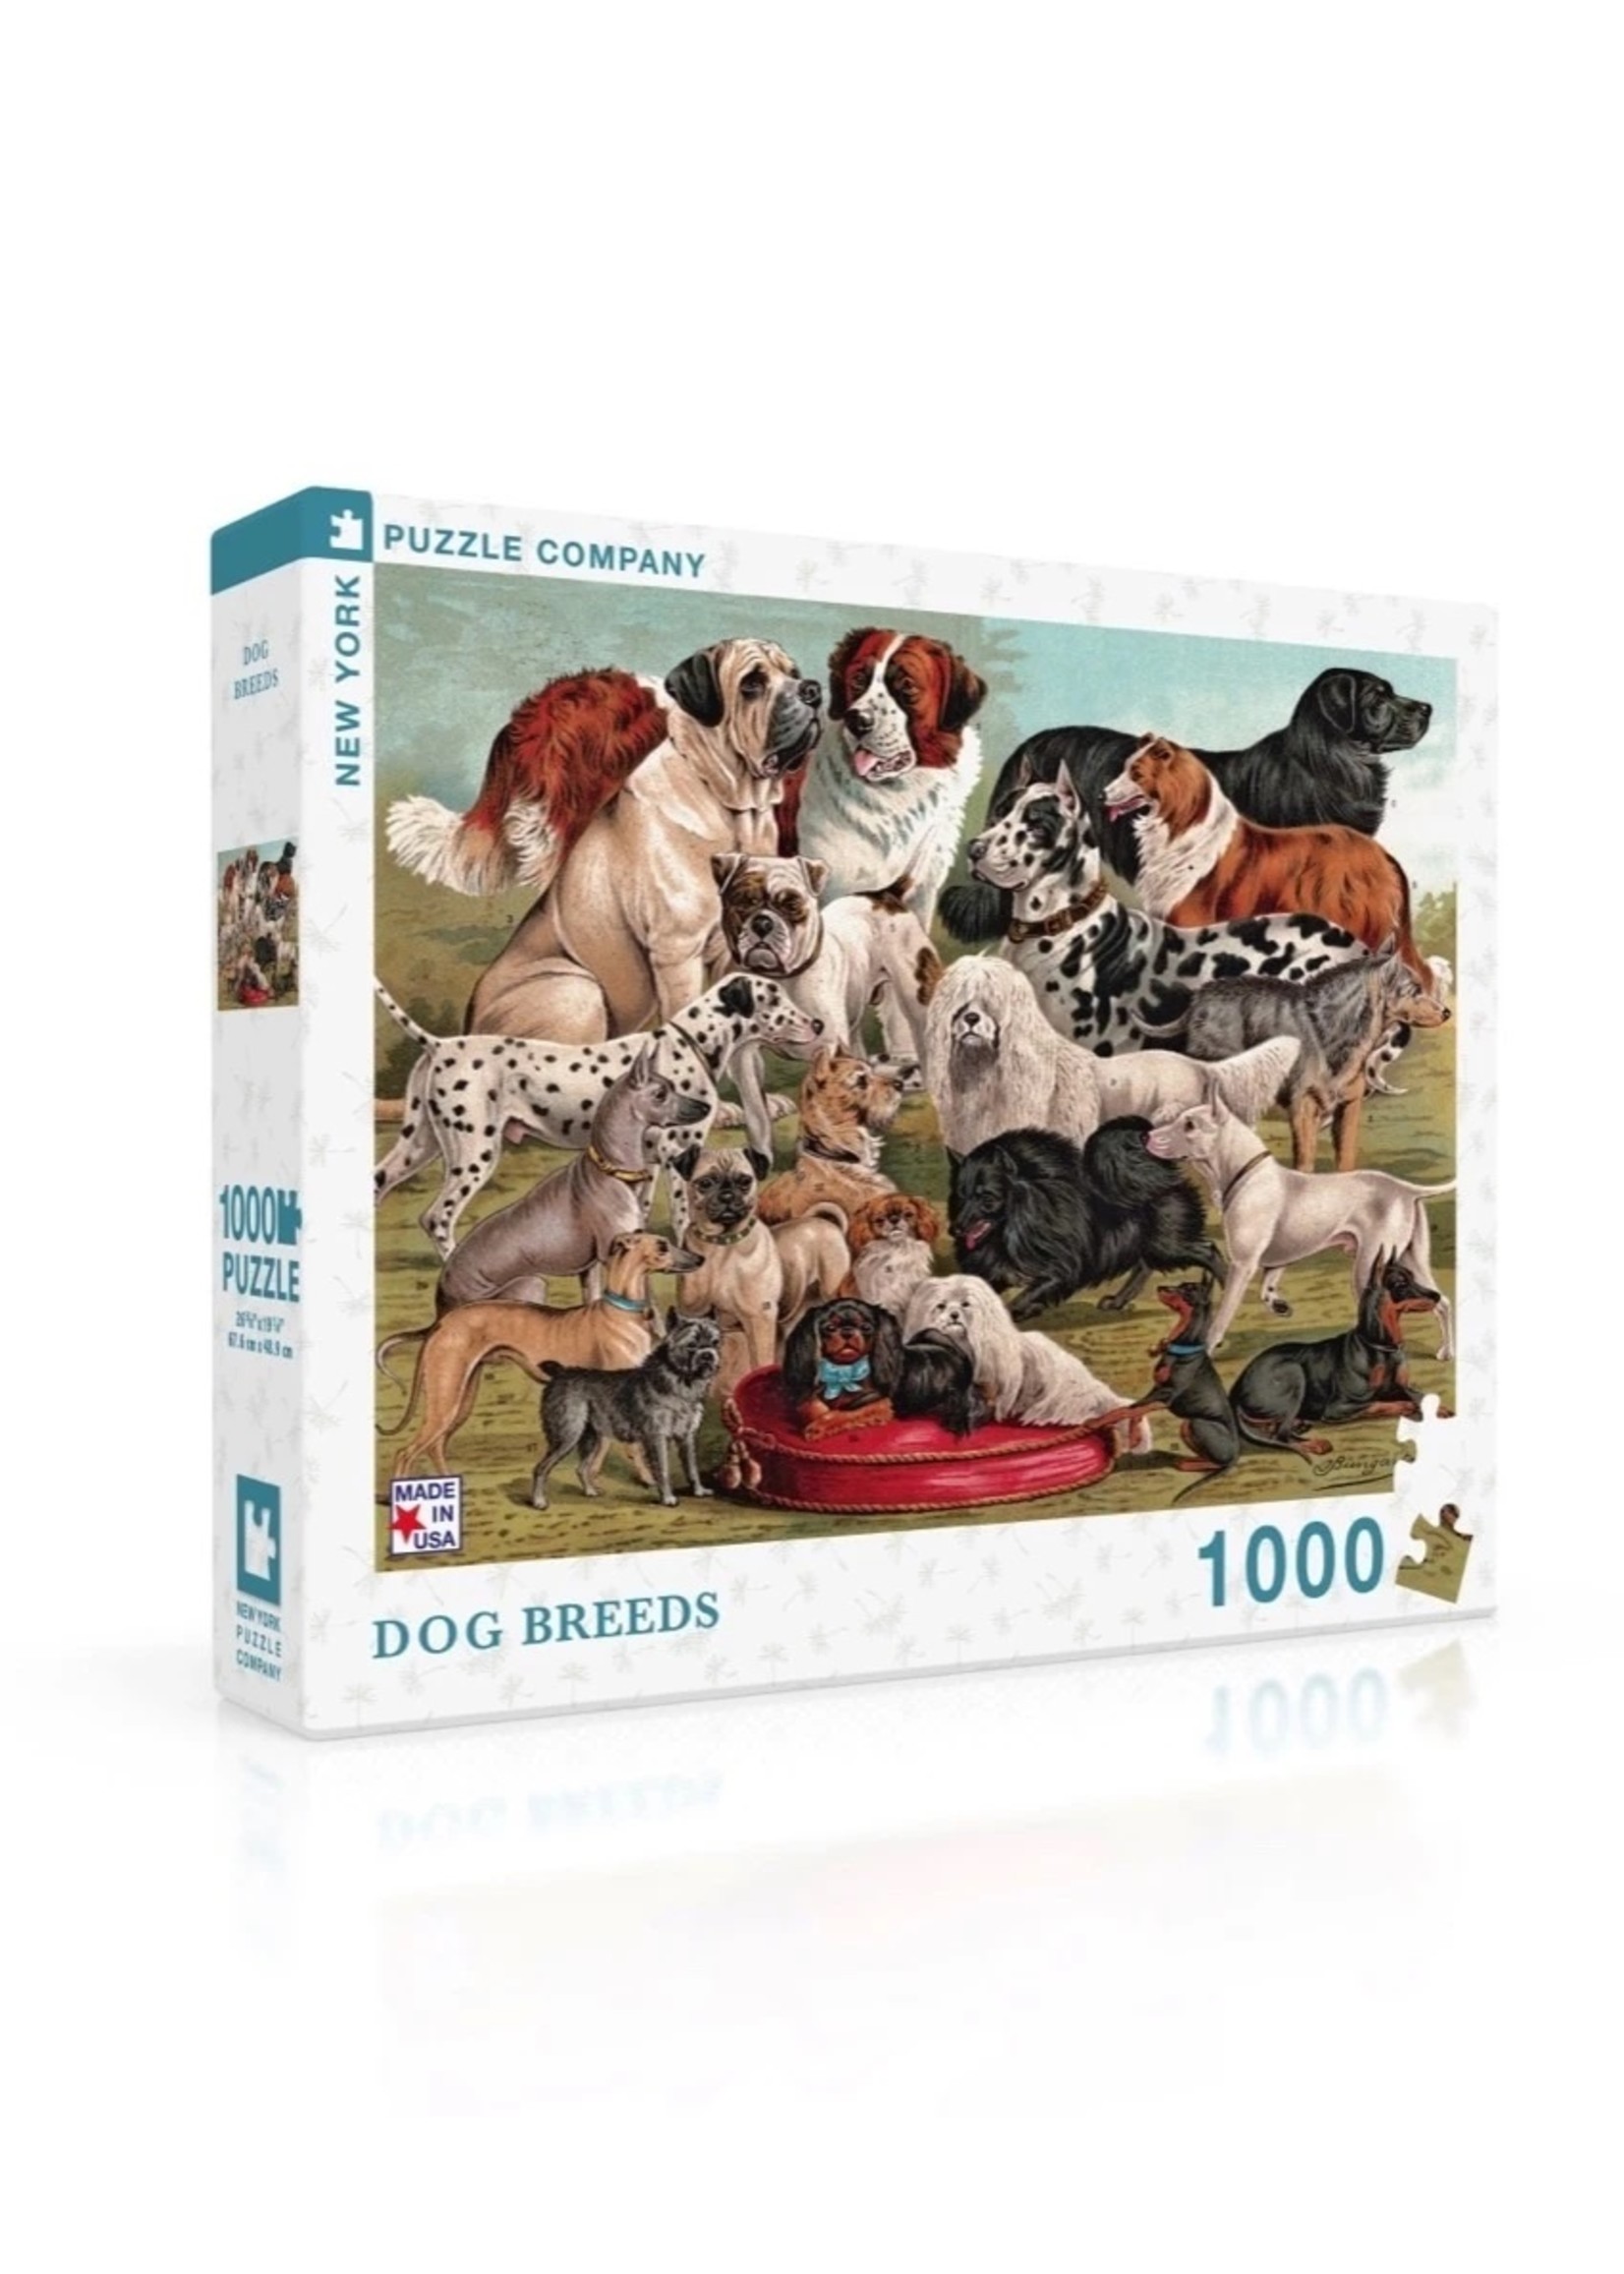 New York Puzzle Co Dog Breeds - 1000 Piece Puzzle